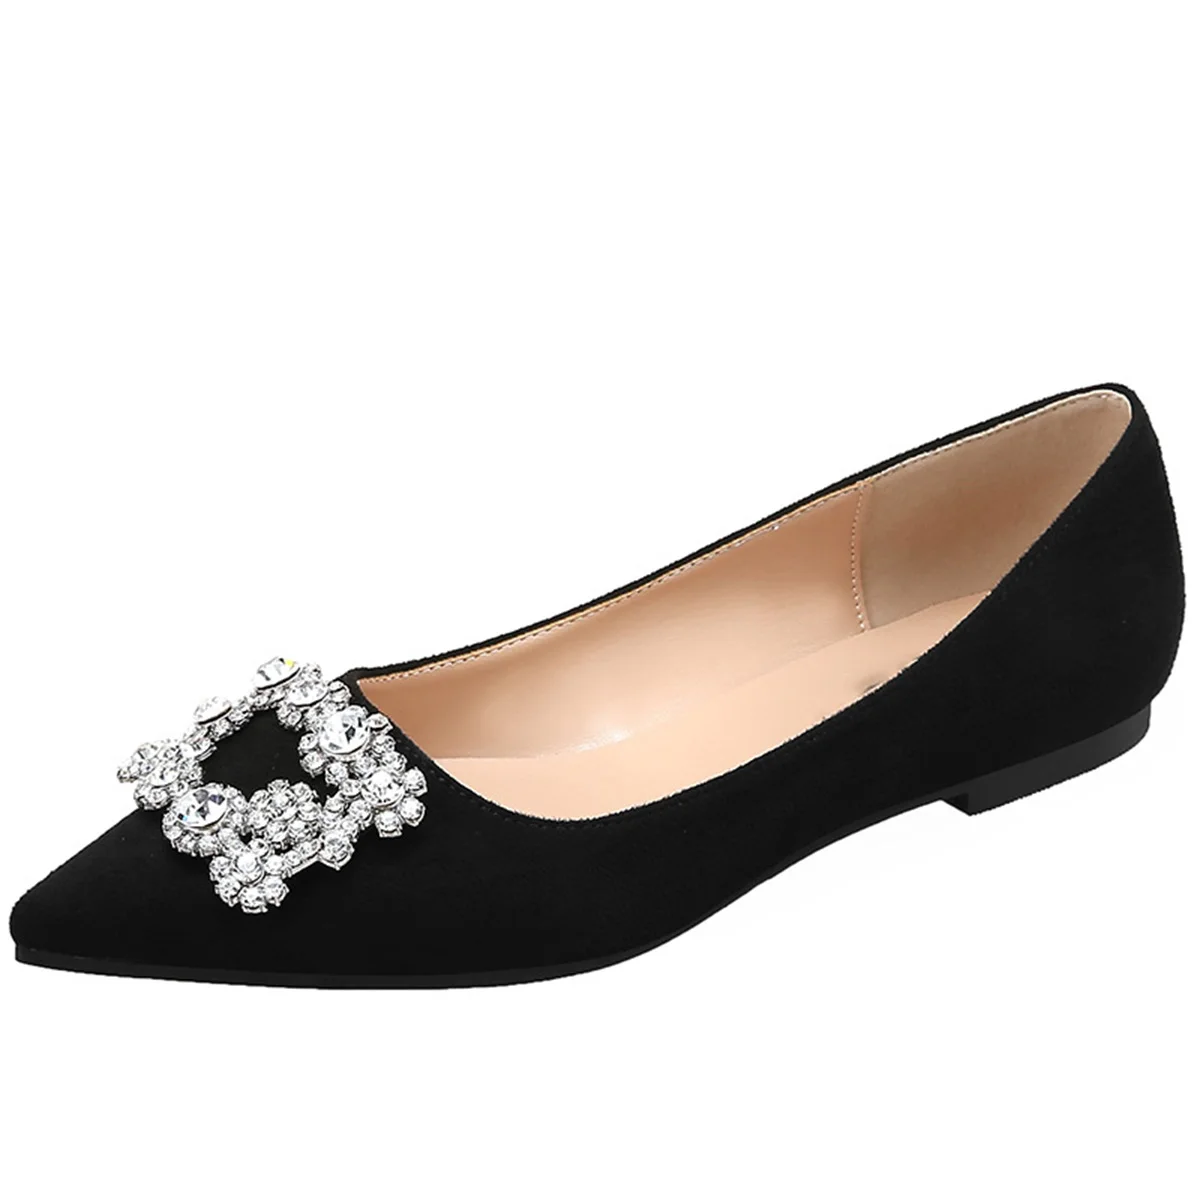 

New Style Women's Flat Shoes Pointed Toe Pumps Beautifully Rhinestone Square Buckle Decoration Casual Women's Shoe